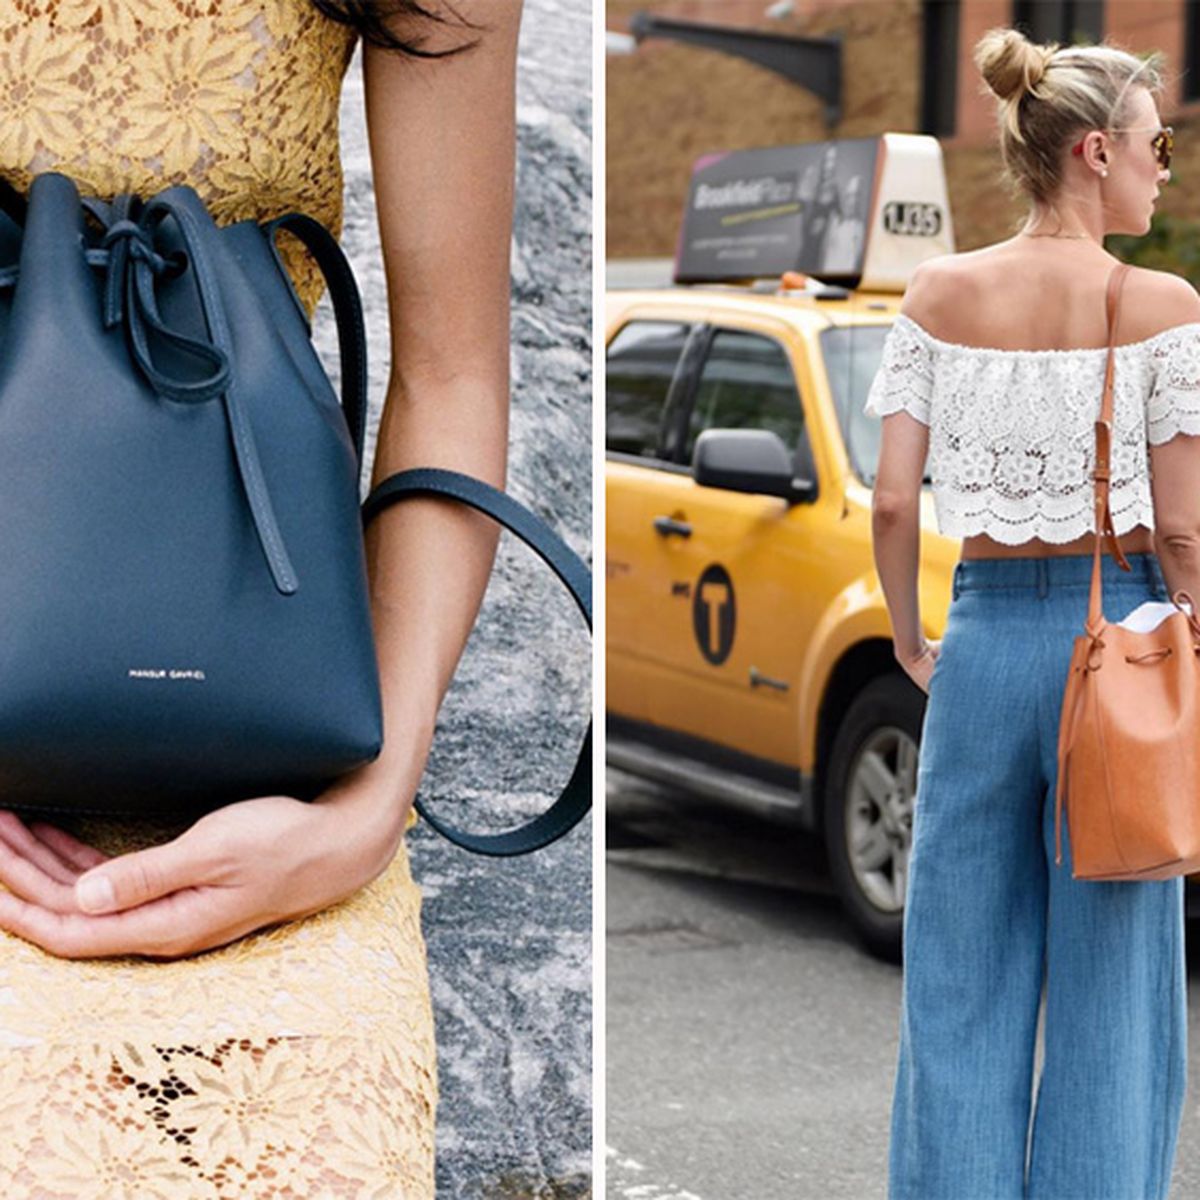 Mansur Gavriel: Why a Bucket Bag Became Fashion's Most-Wanted